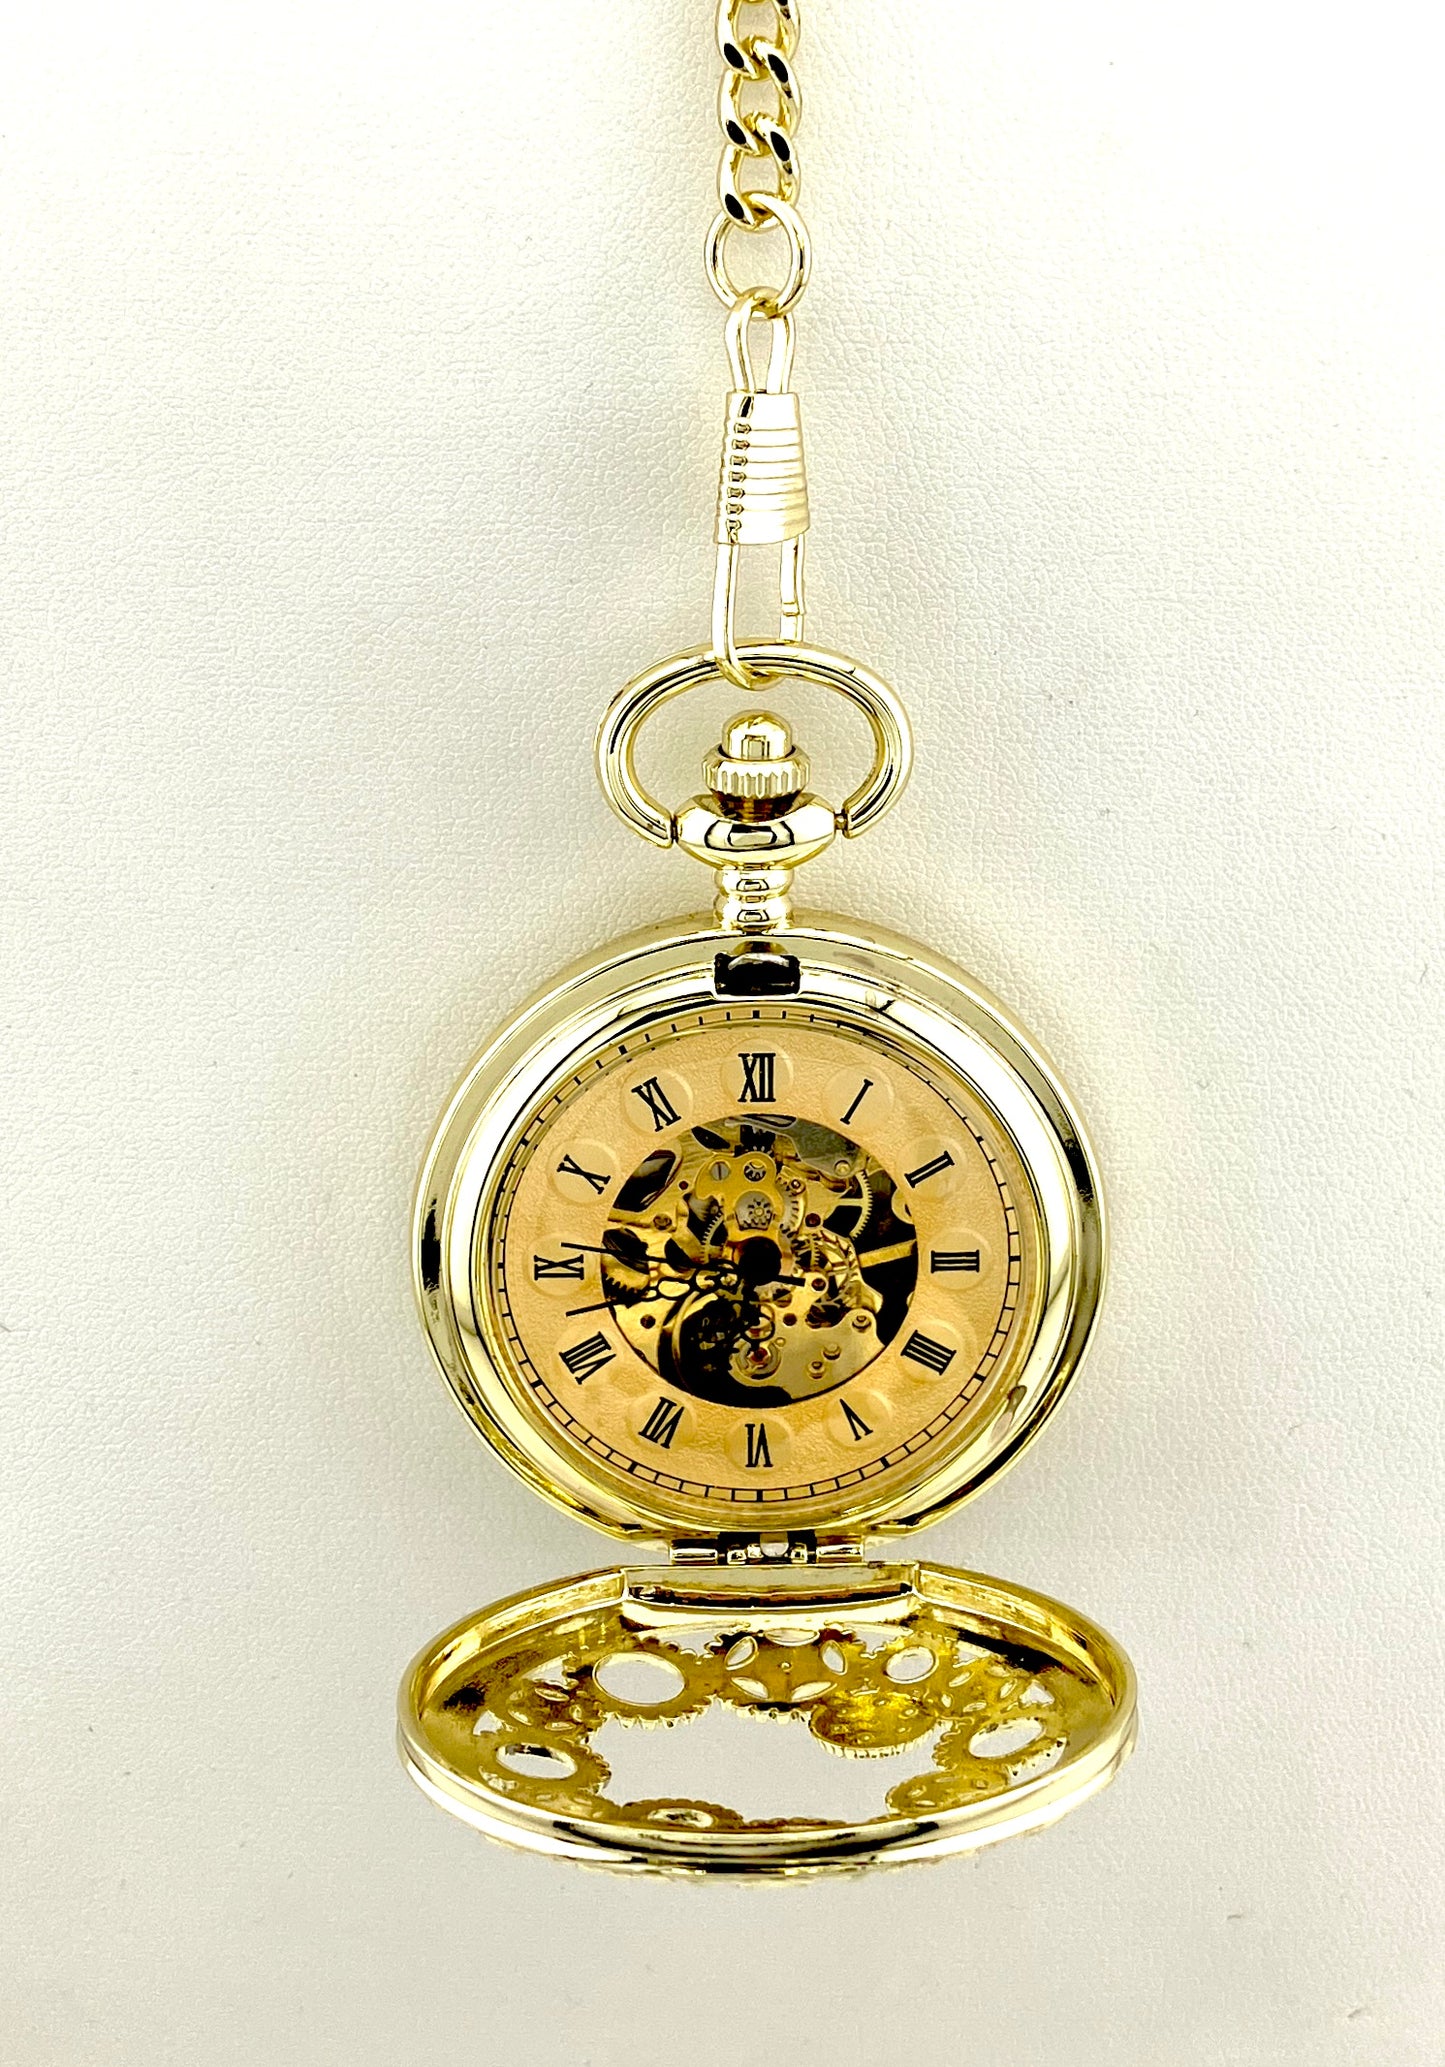 Winding Pocket Watch Non-Vintage Gold Coloured Metal with Gears Pattern, Hinged Cover